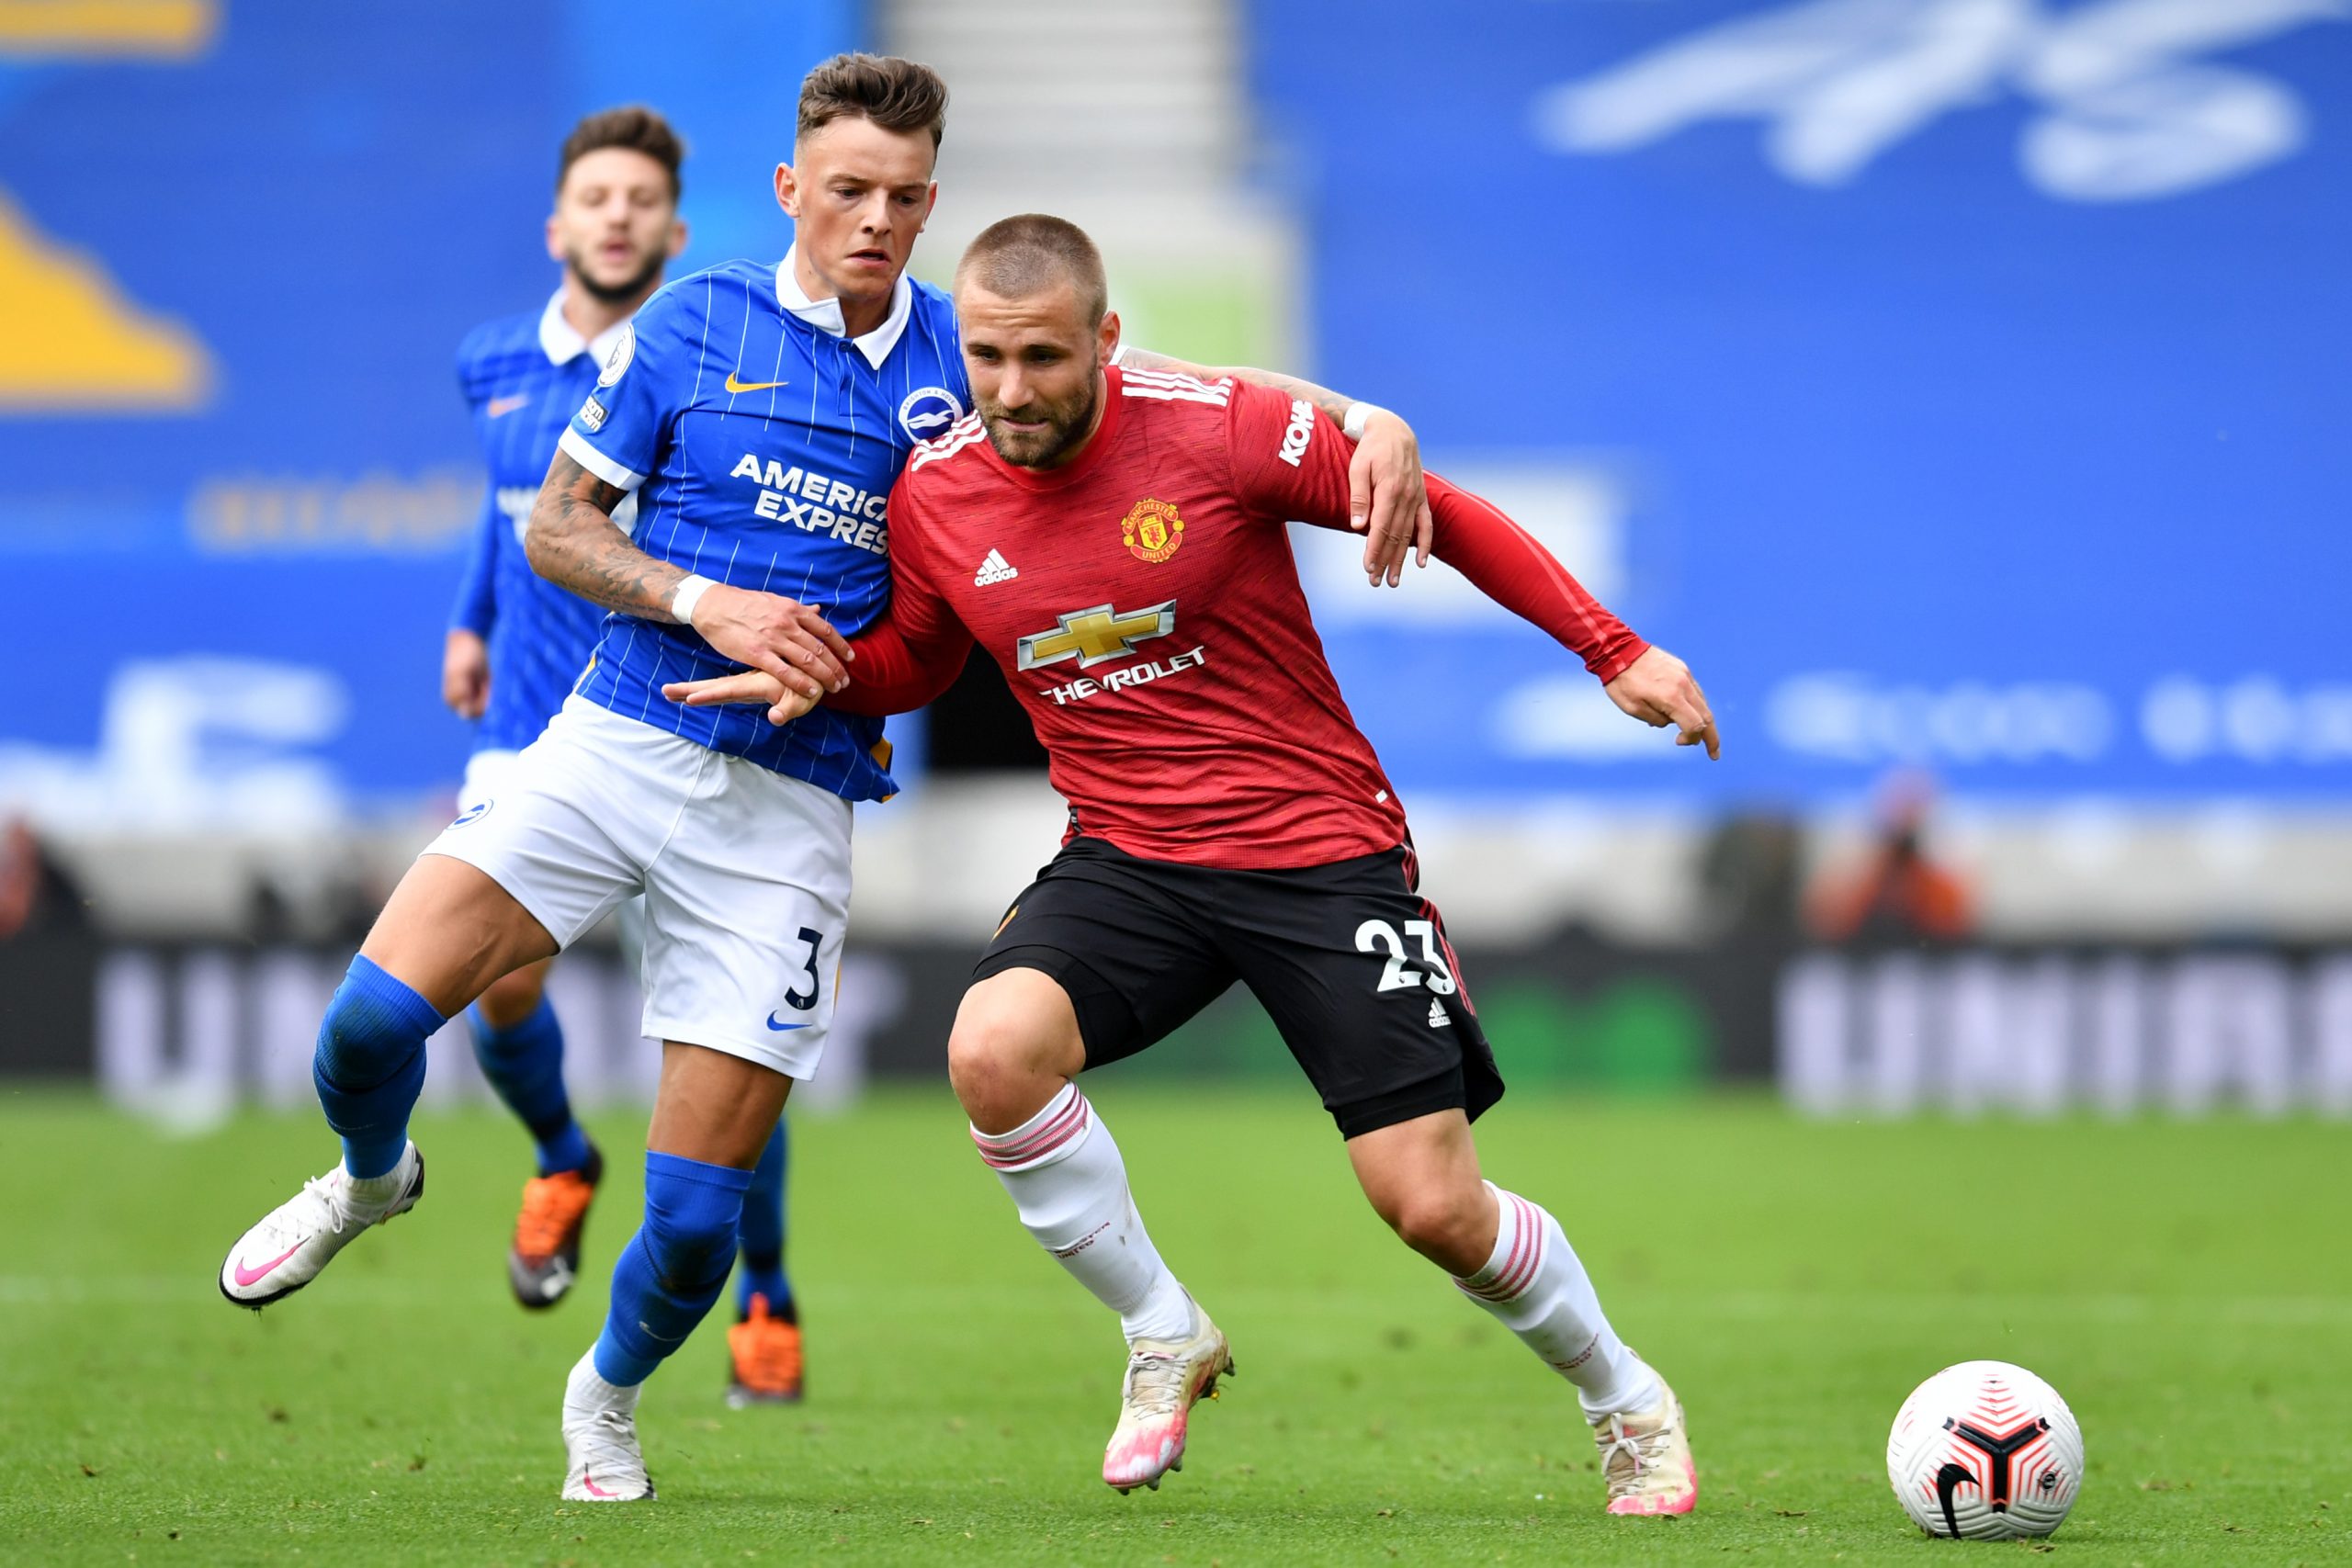 Luke Shaw in action for Manchester United. (GETTY Images)